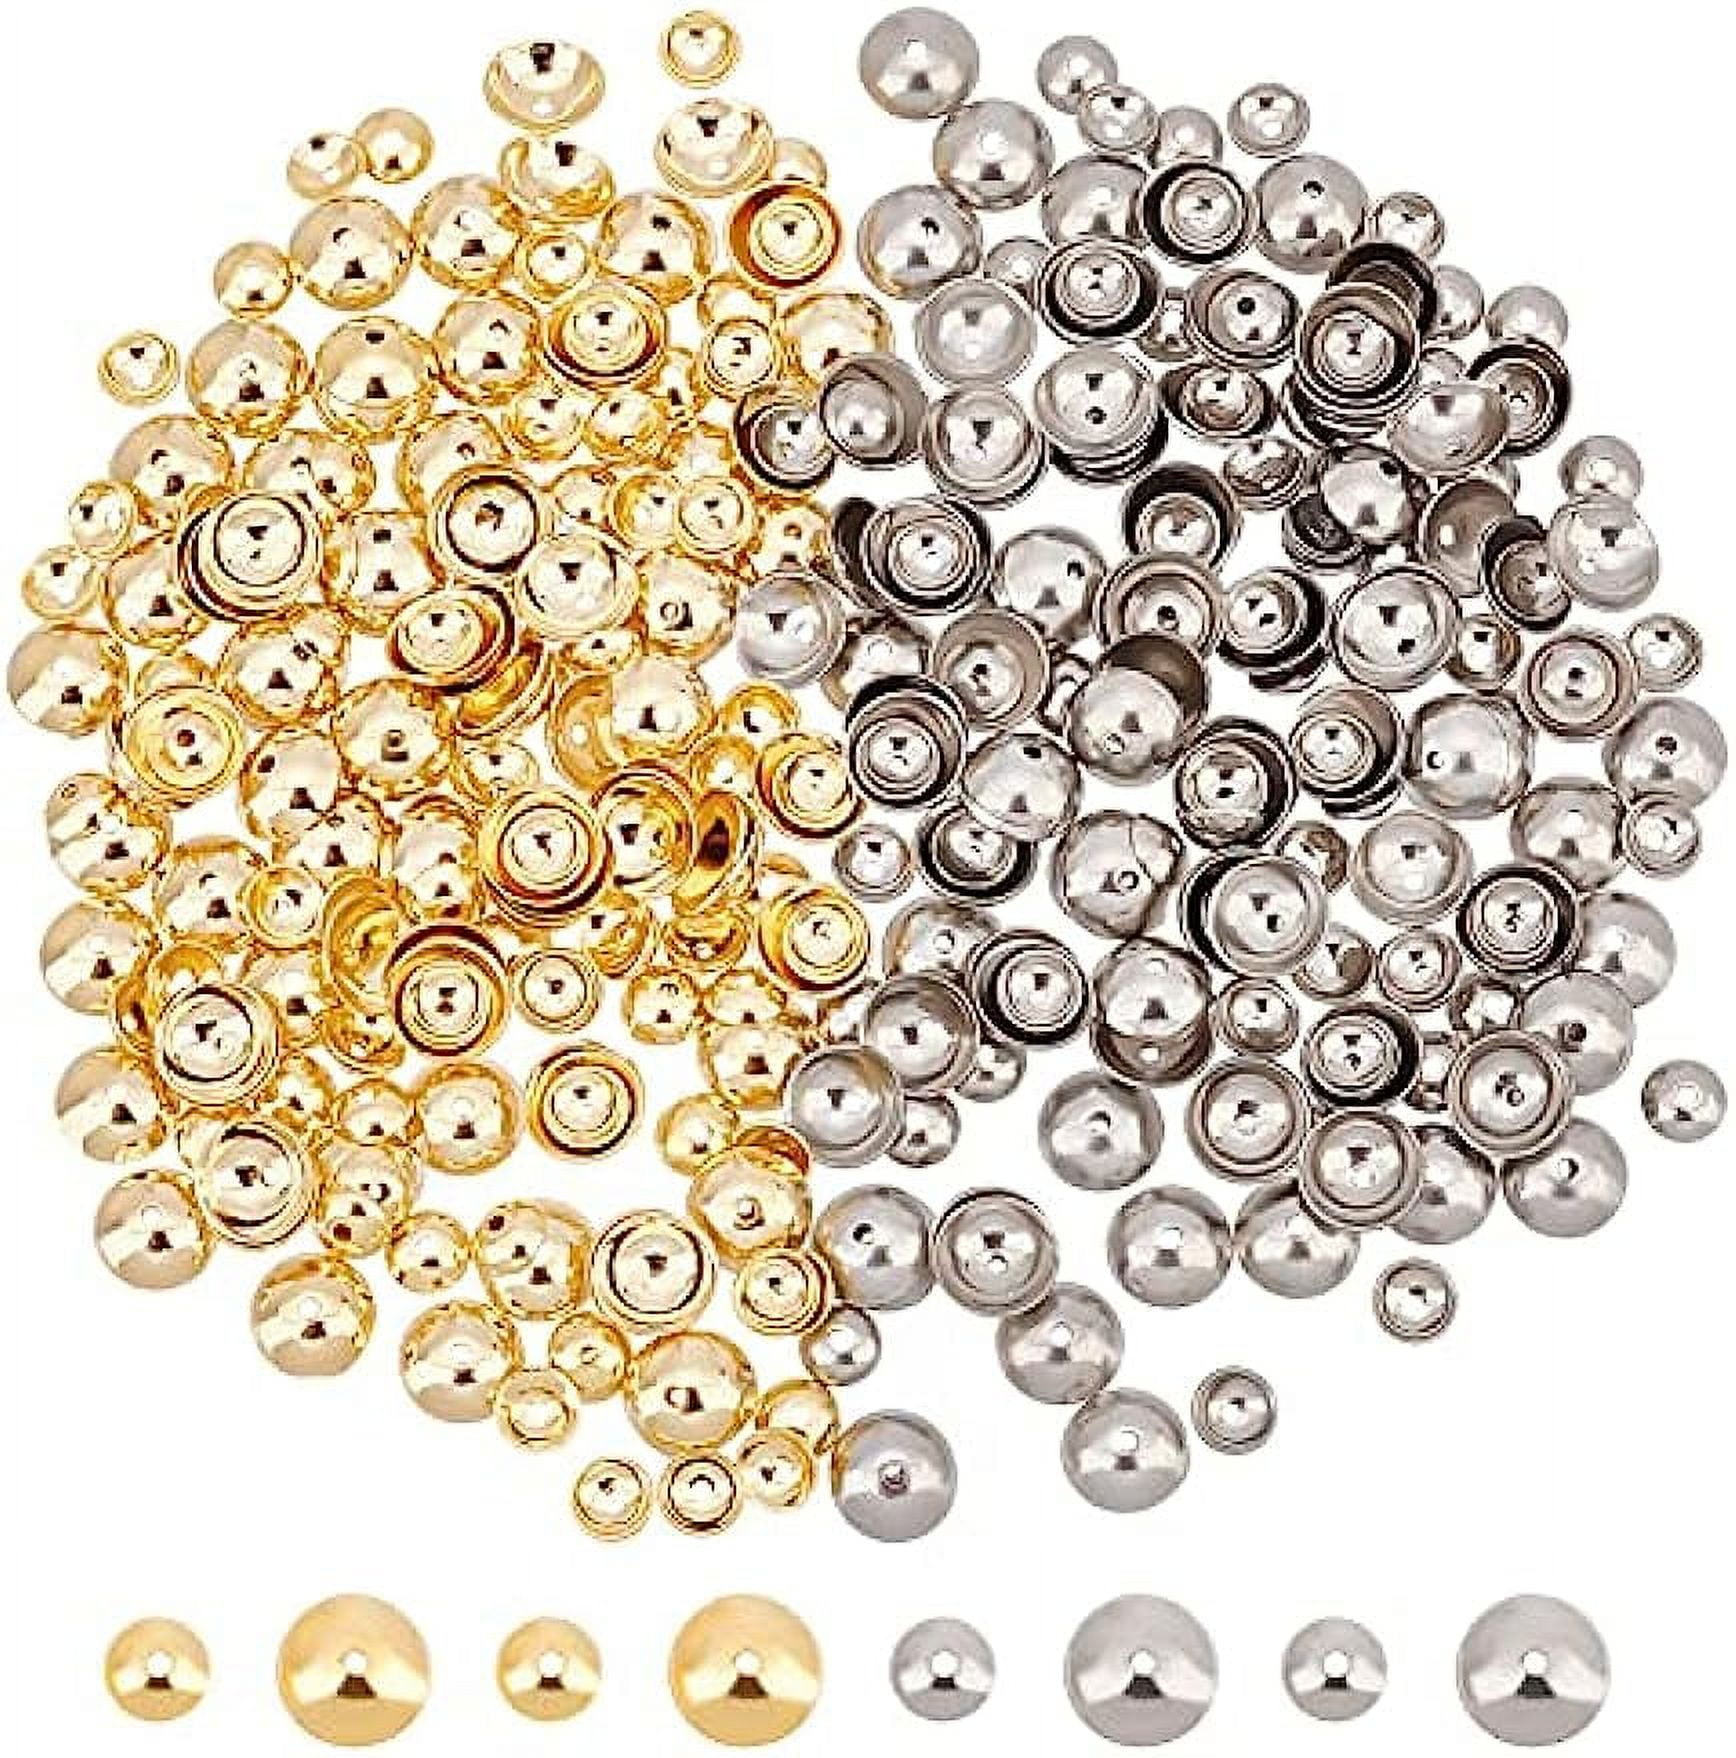 UNICRAFTALE About 120pcs 8-Petal Flower Bead Caps Golden Spacer End Caps  Hollow Beads End Caps Stainless Steel Bead Cap Spacers for Bracelet  Necklace